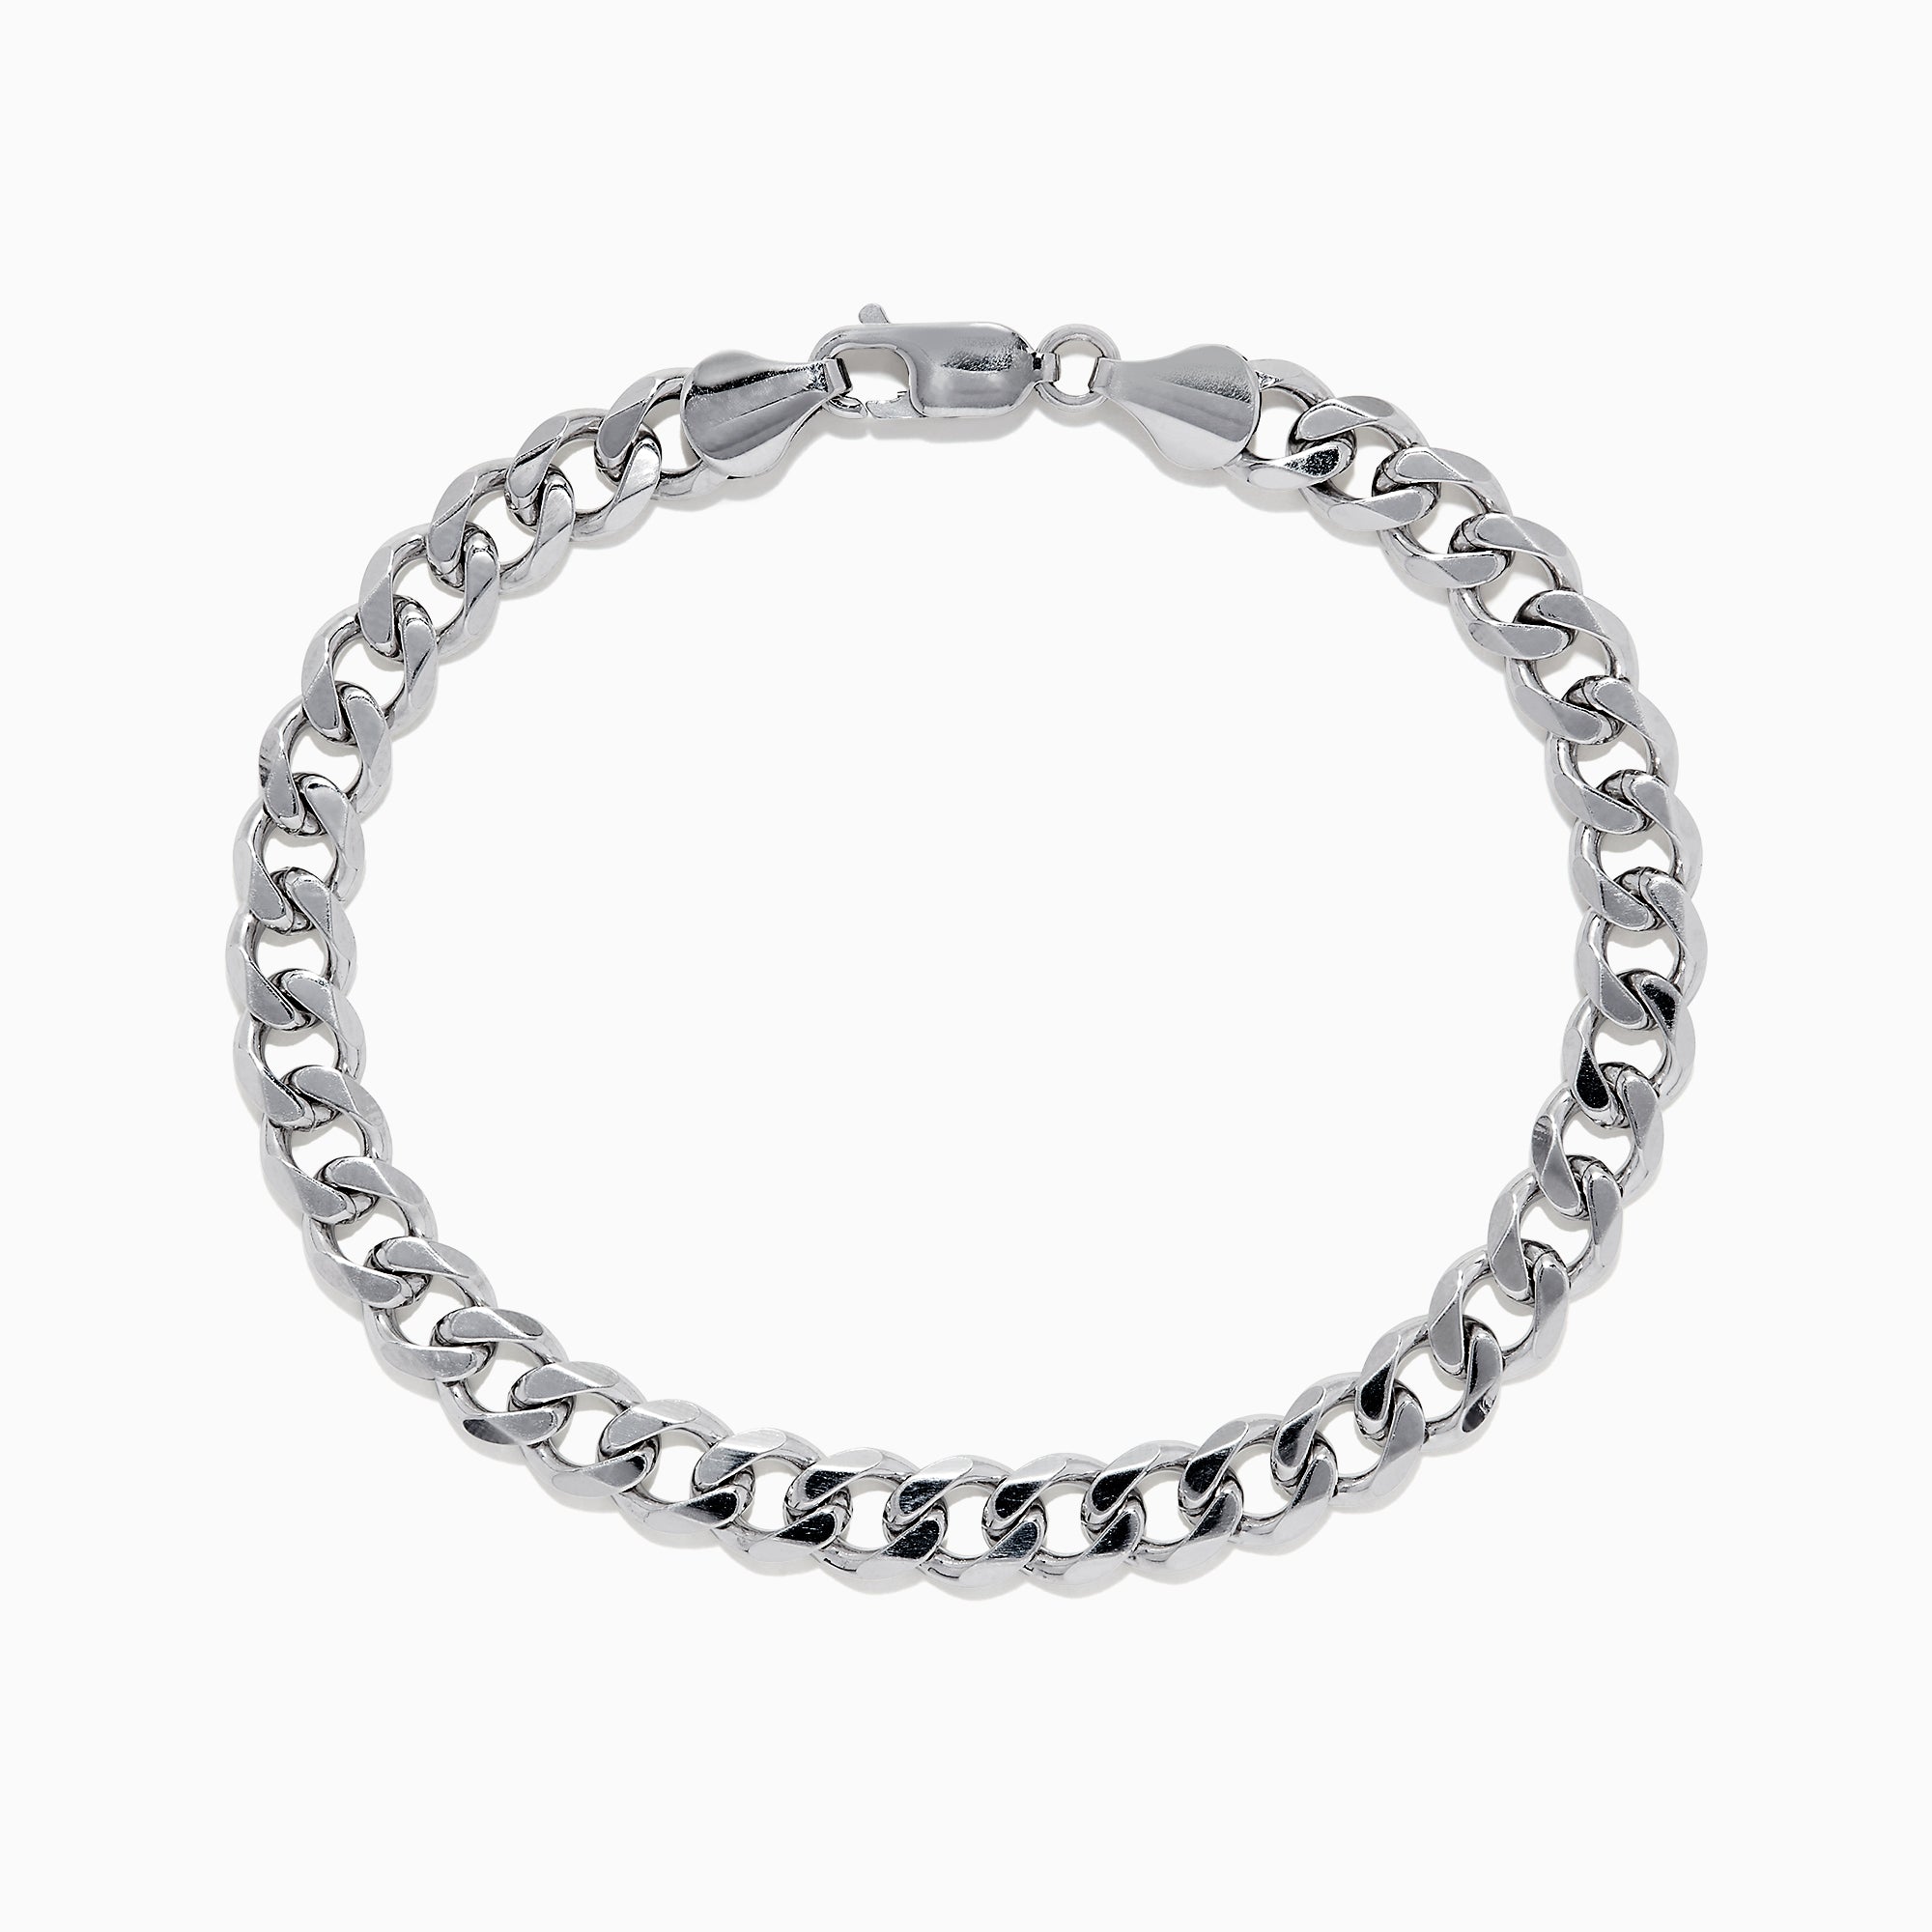 Women's Silver Bracelet Cahin 925 Sterling Silver Bracelet Bangle Chain  Fashion Jewelry Gift for Banquet Party Wedding Accessory - Walmart.com